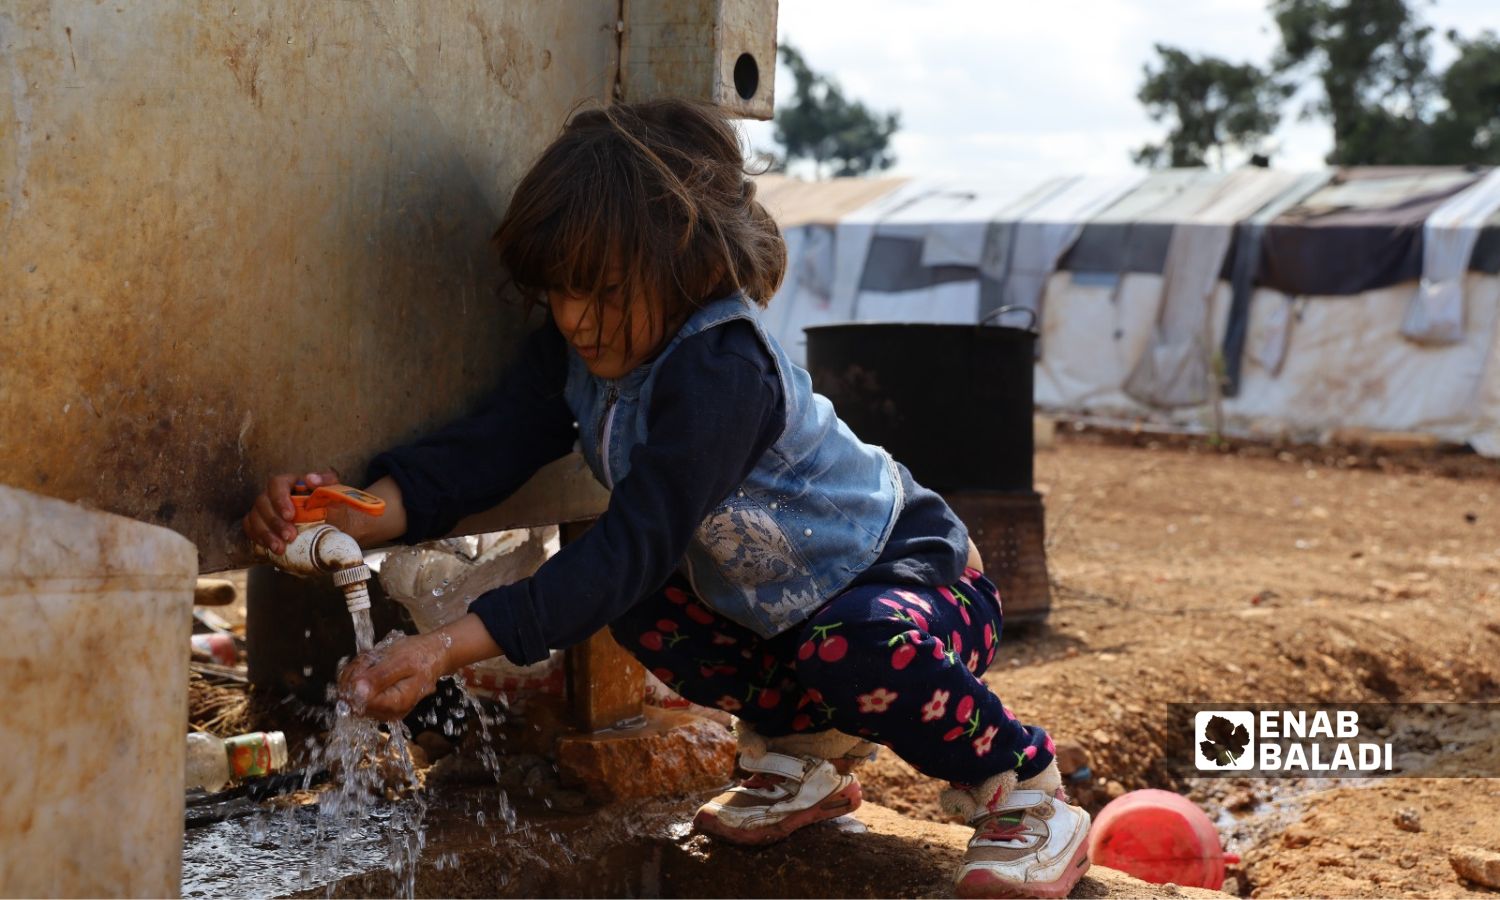 A child girl in one of the camps in the Ziyadiyah area in the center of Afrin city in the northern countryside of Aleppo - January 2022 (Enab Baladi/Amir Kharboutli)